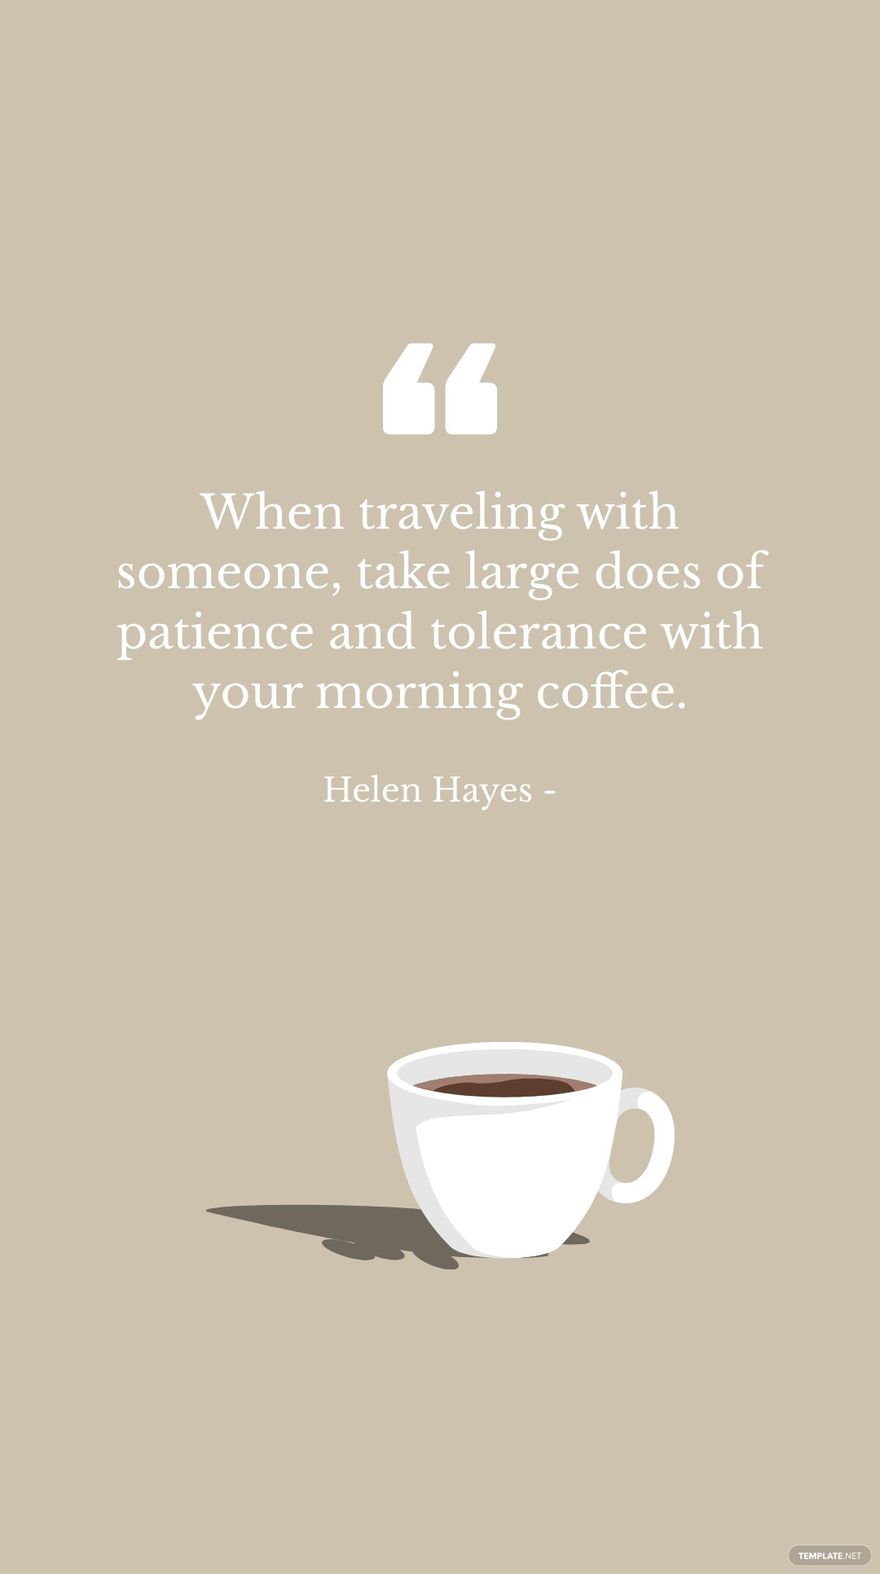 Helen Hayes - When traveling with someone, take large does of patience and tolerance with your morning coffee.